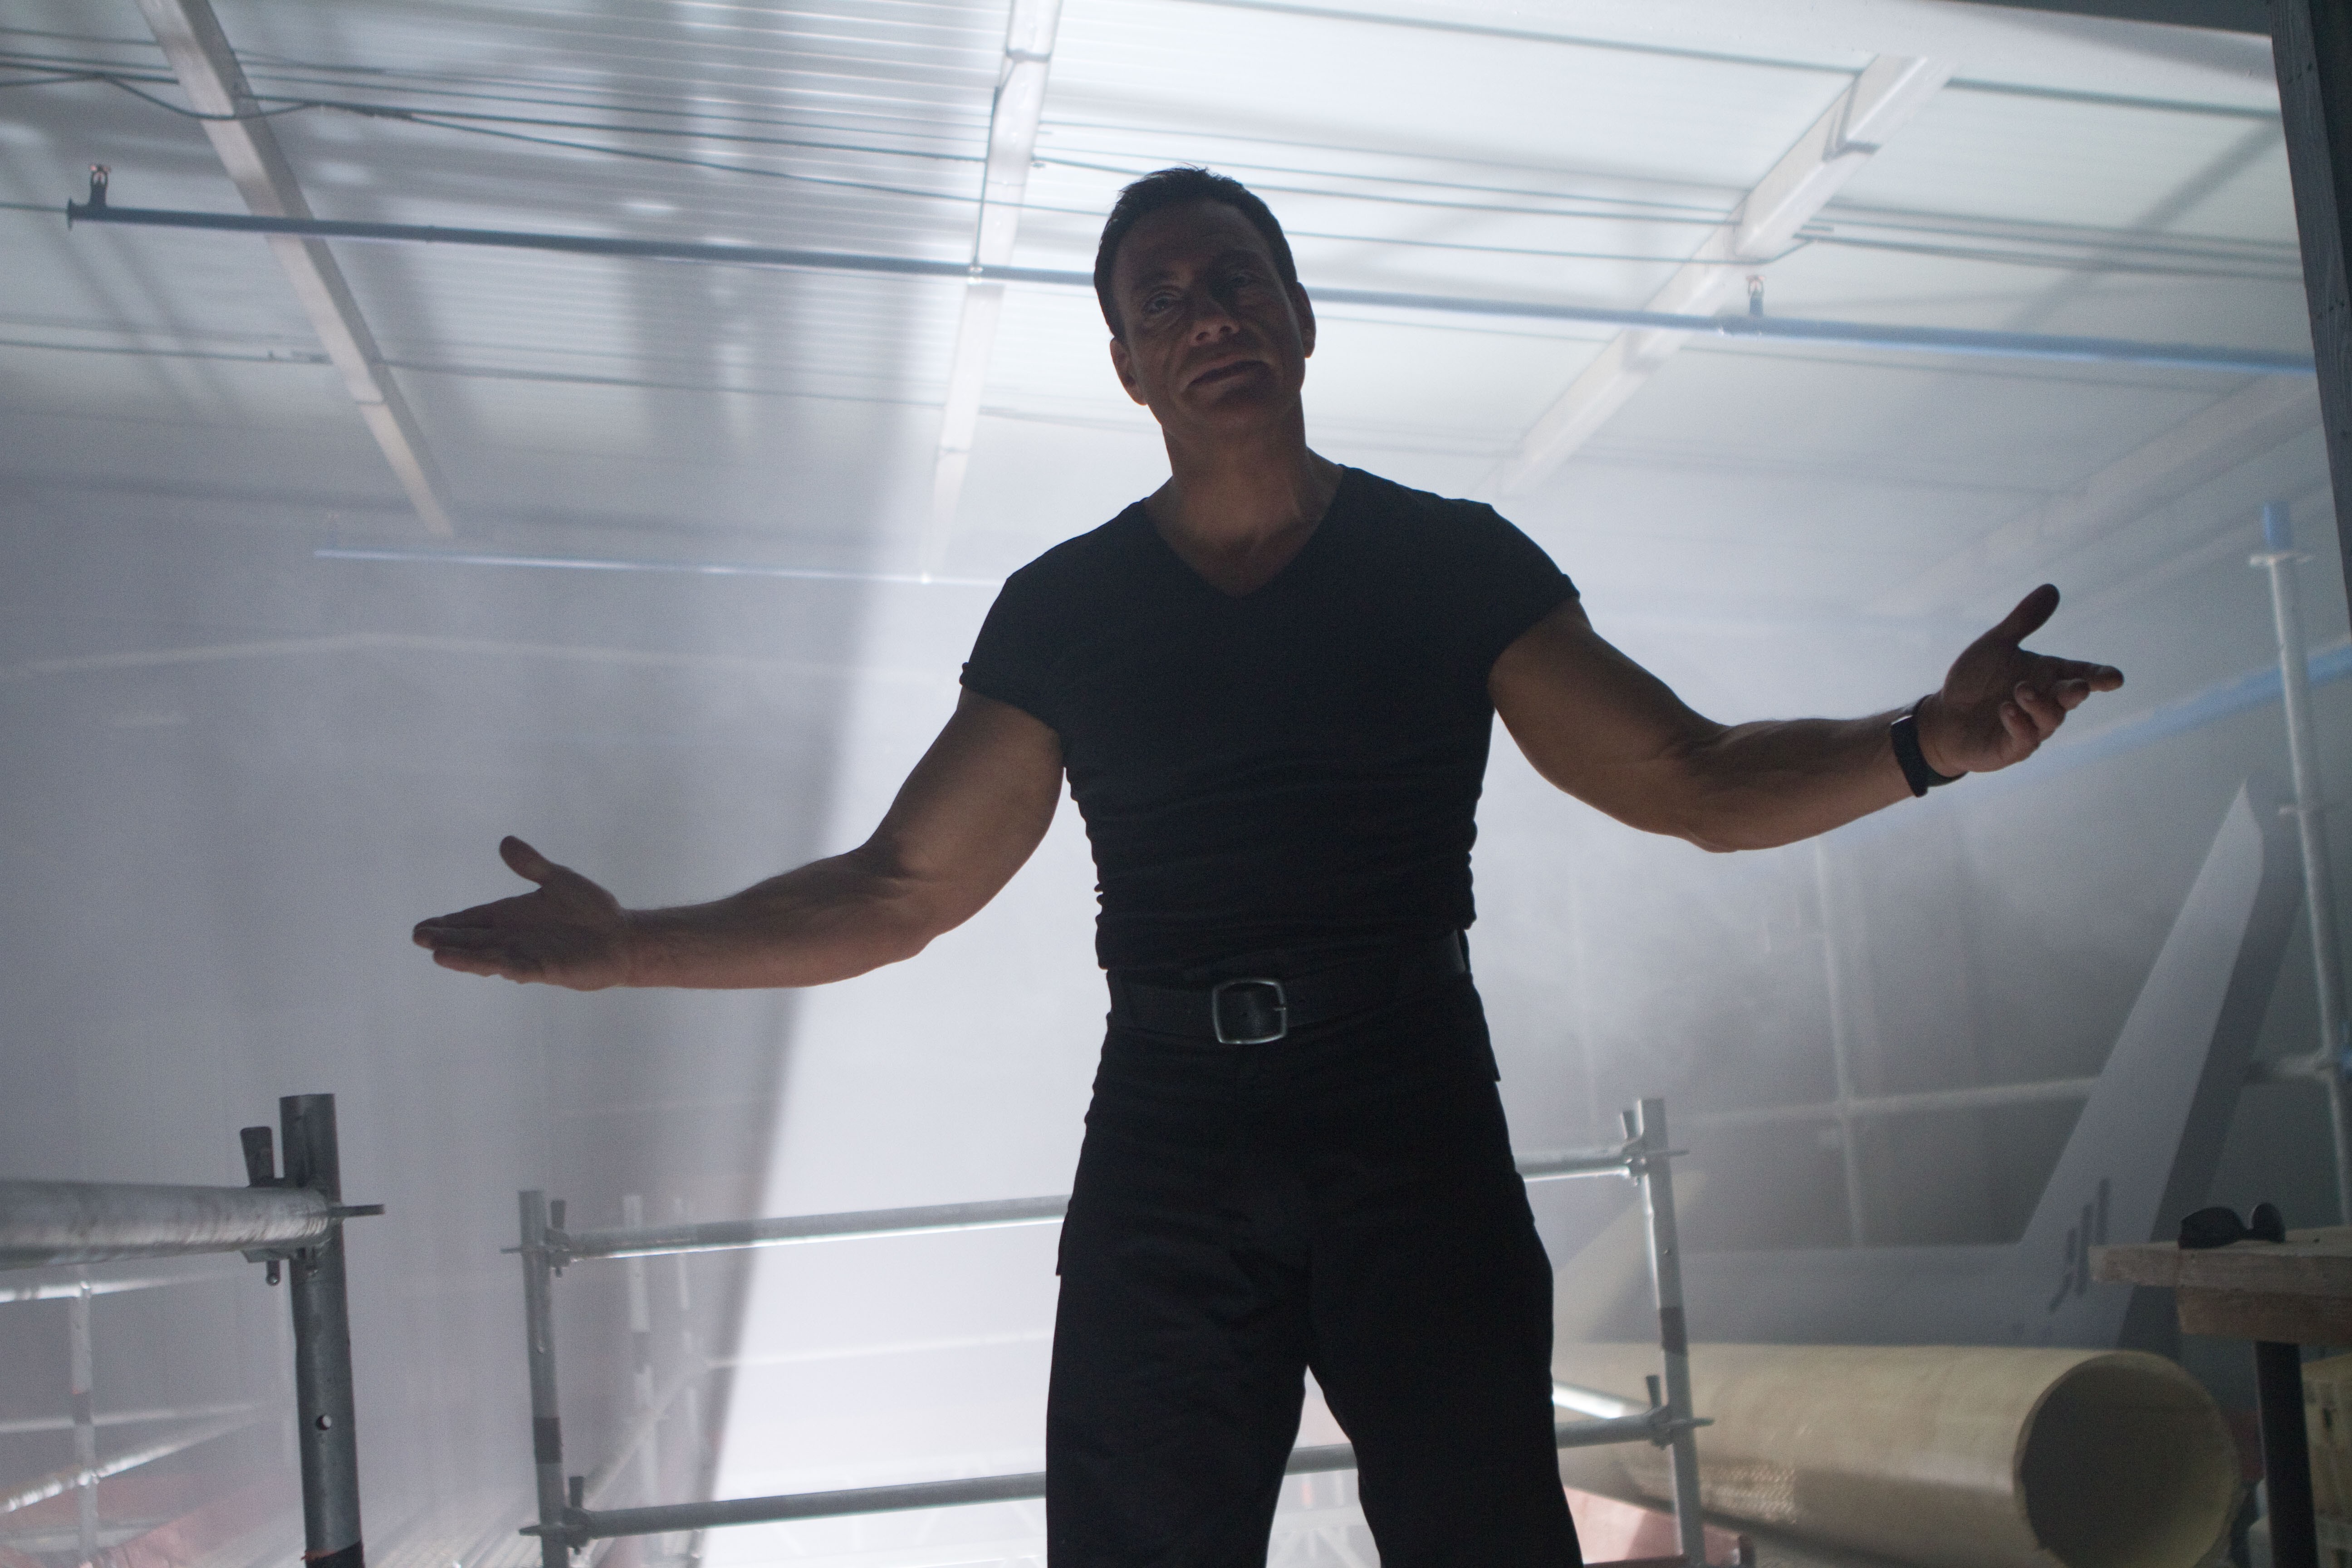 movie, the expendables 2, jean claude van damme, vilain (the expendables), the expendables High Definition image